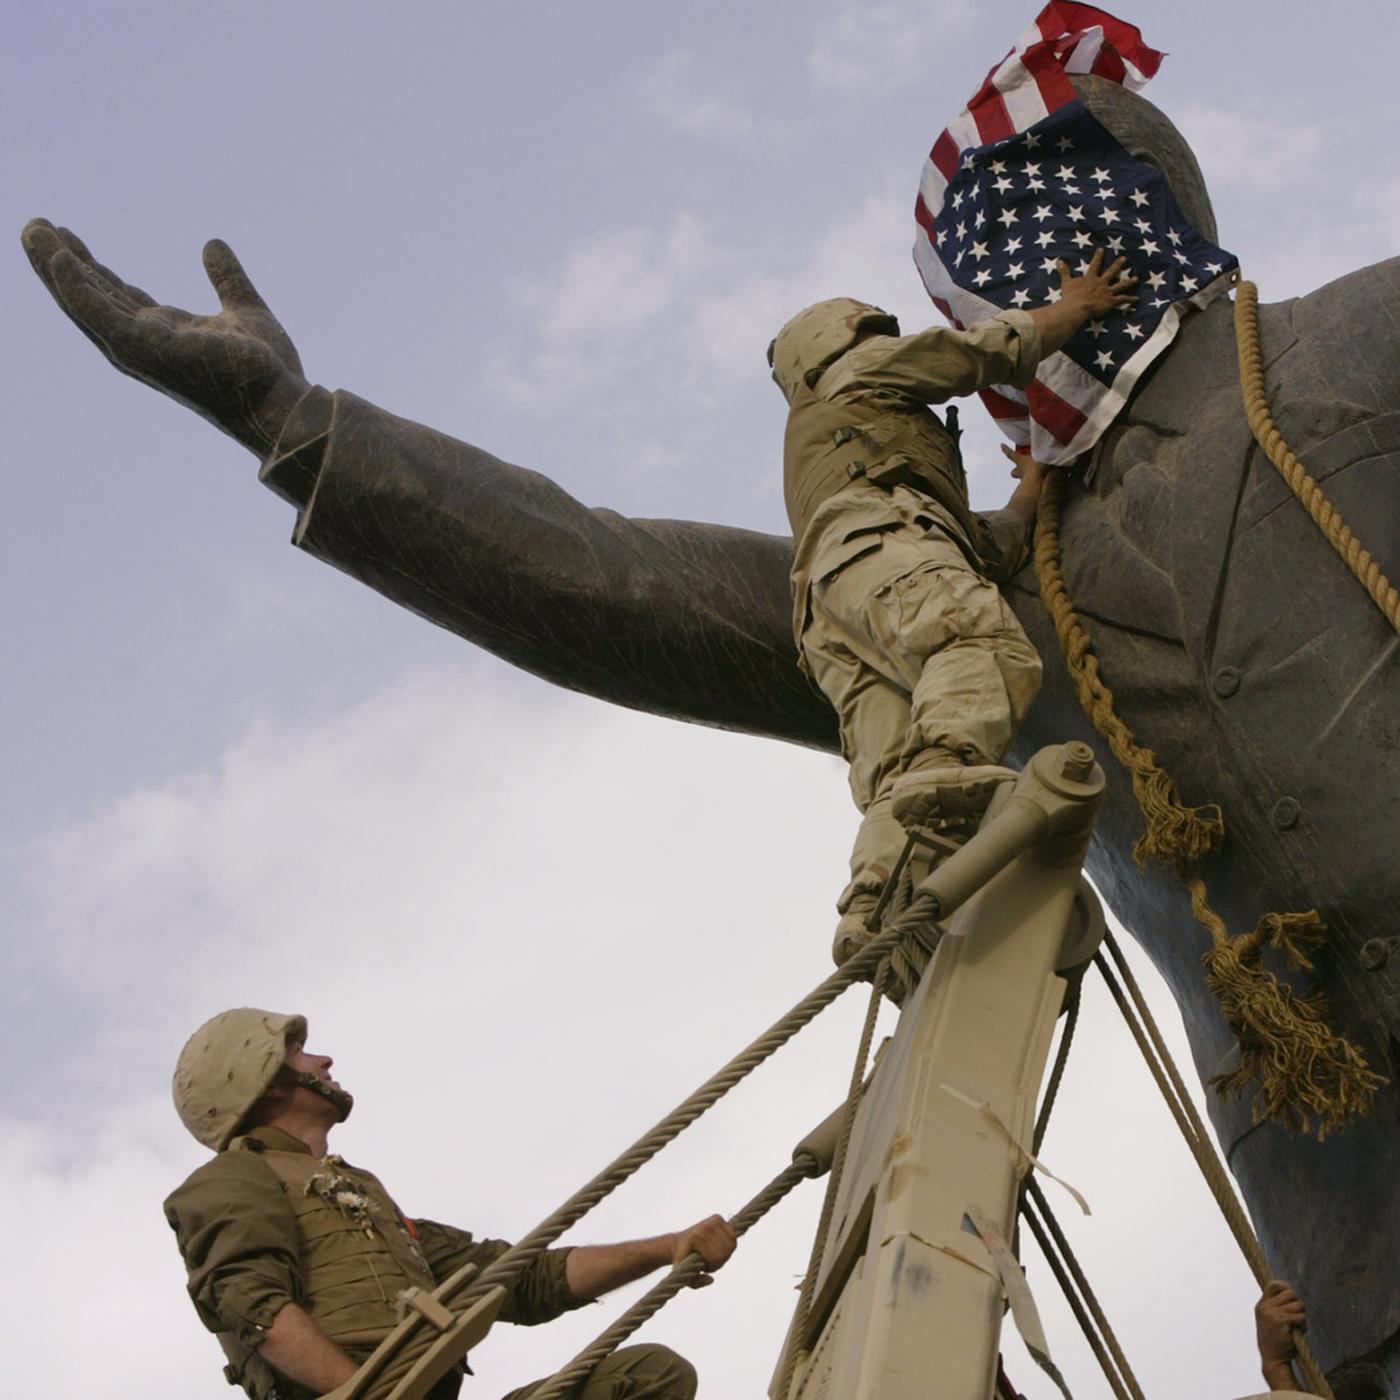 The Day Saddam Hussein’s Statue Came Down